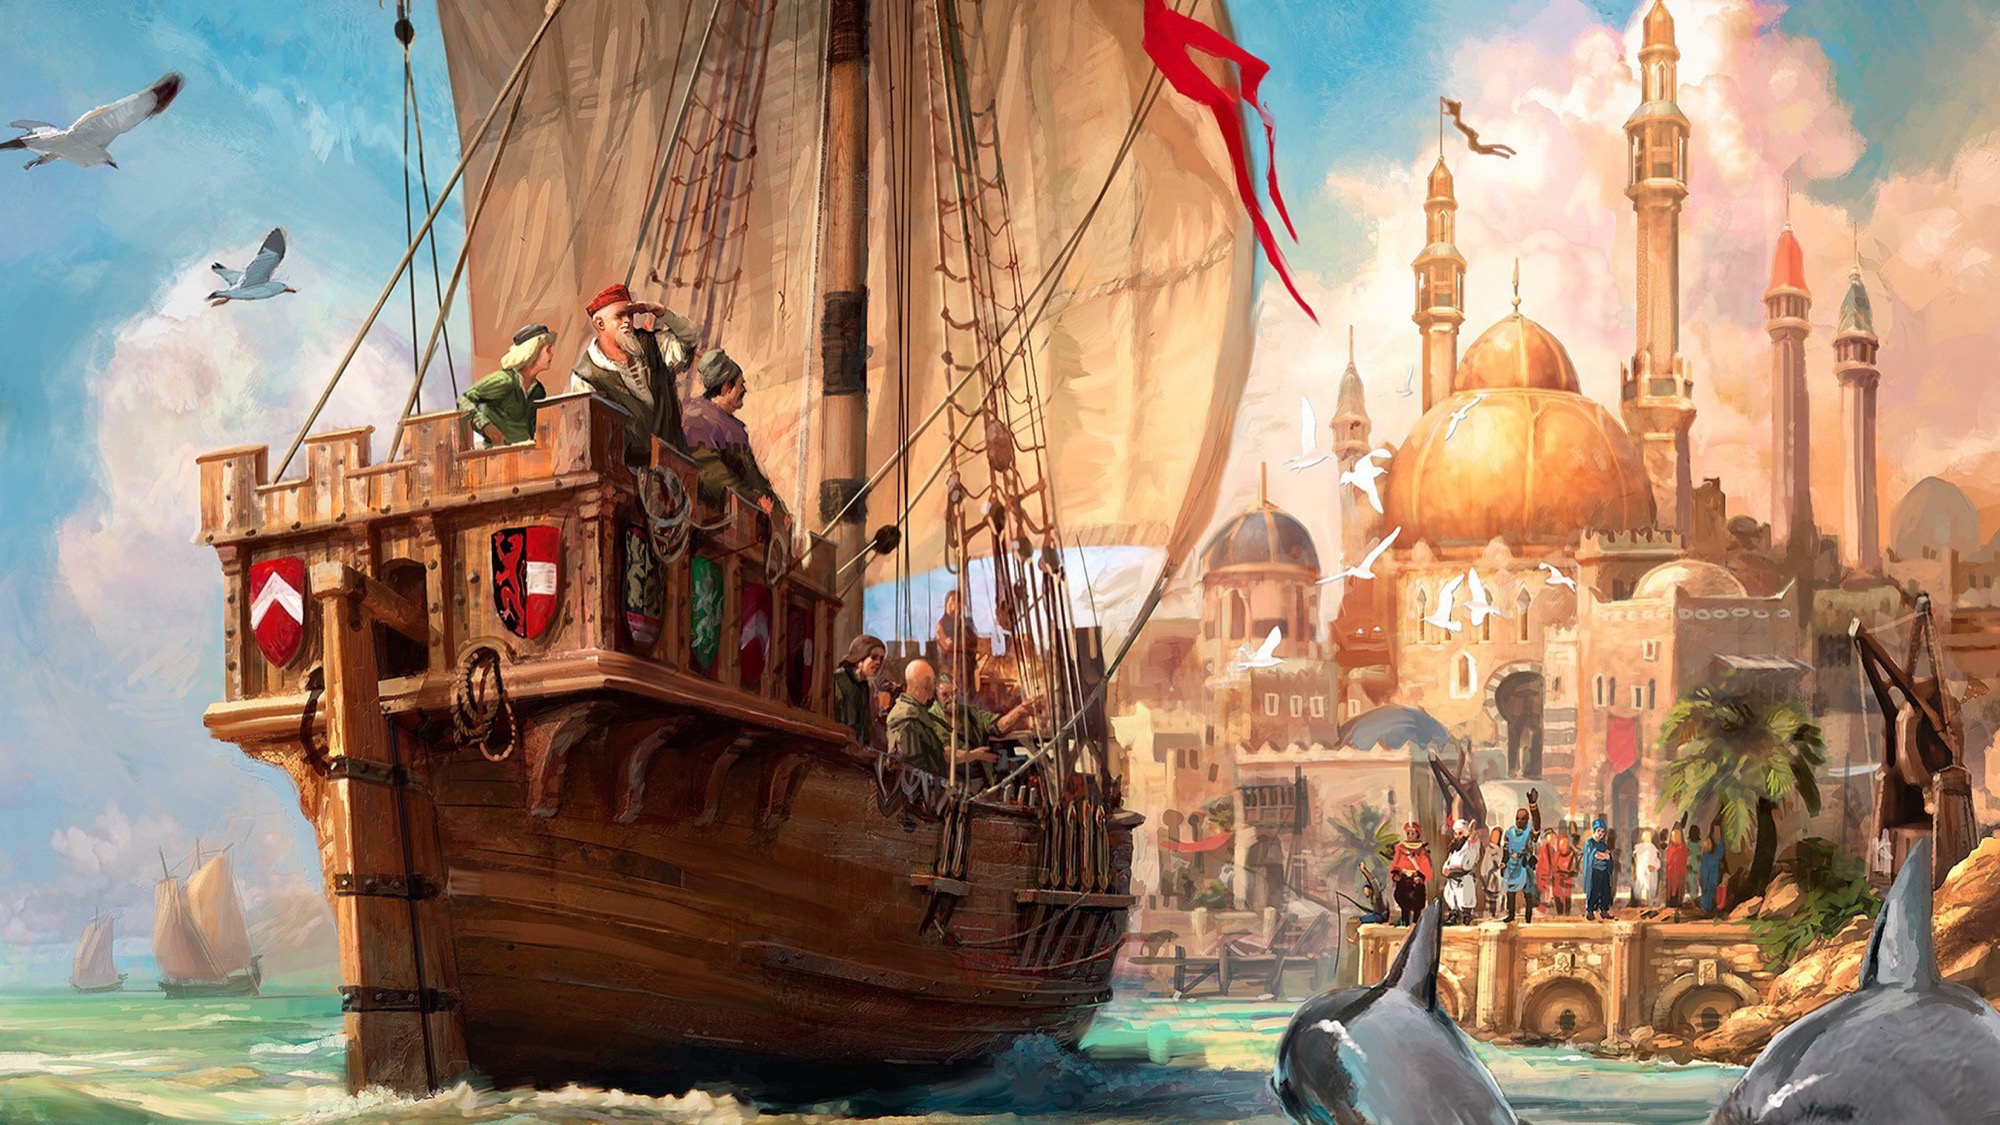 This Week At Ubisoft: Far Cry 5 Anniversary Celebrations Commence, Anno  1800 Comes to Consoles